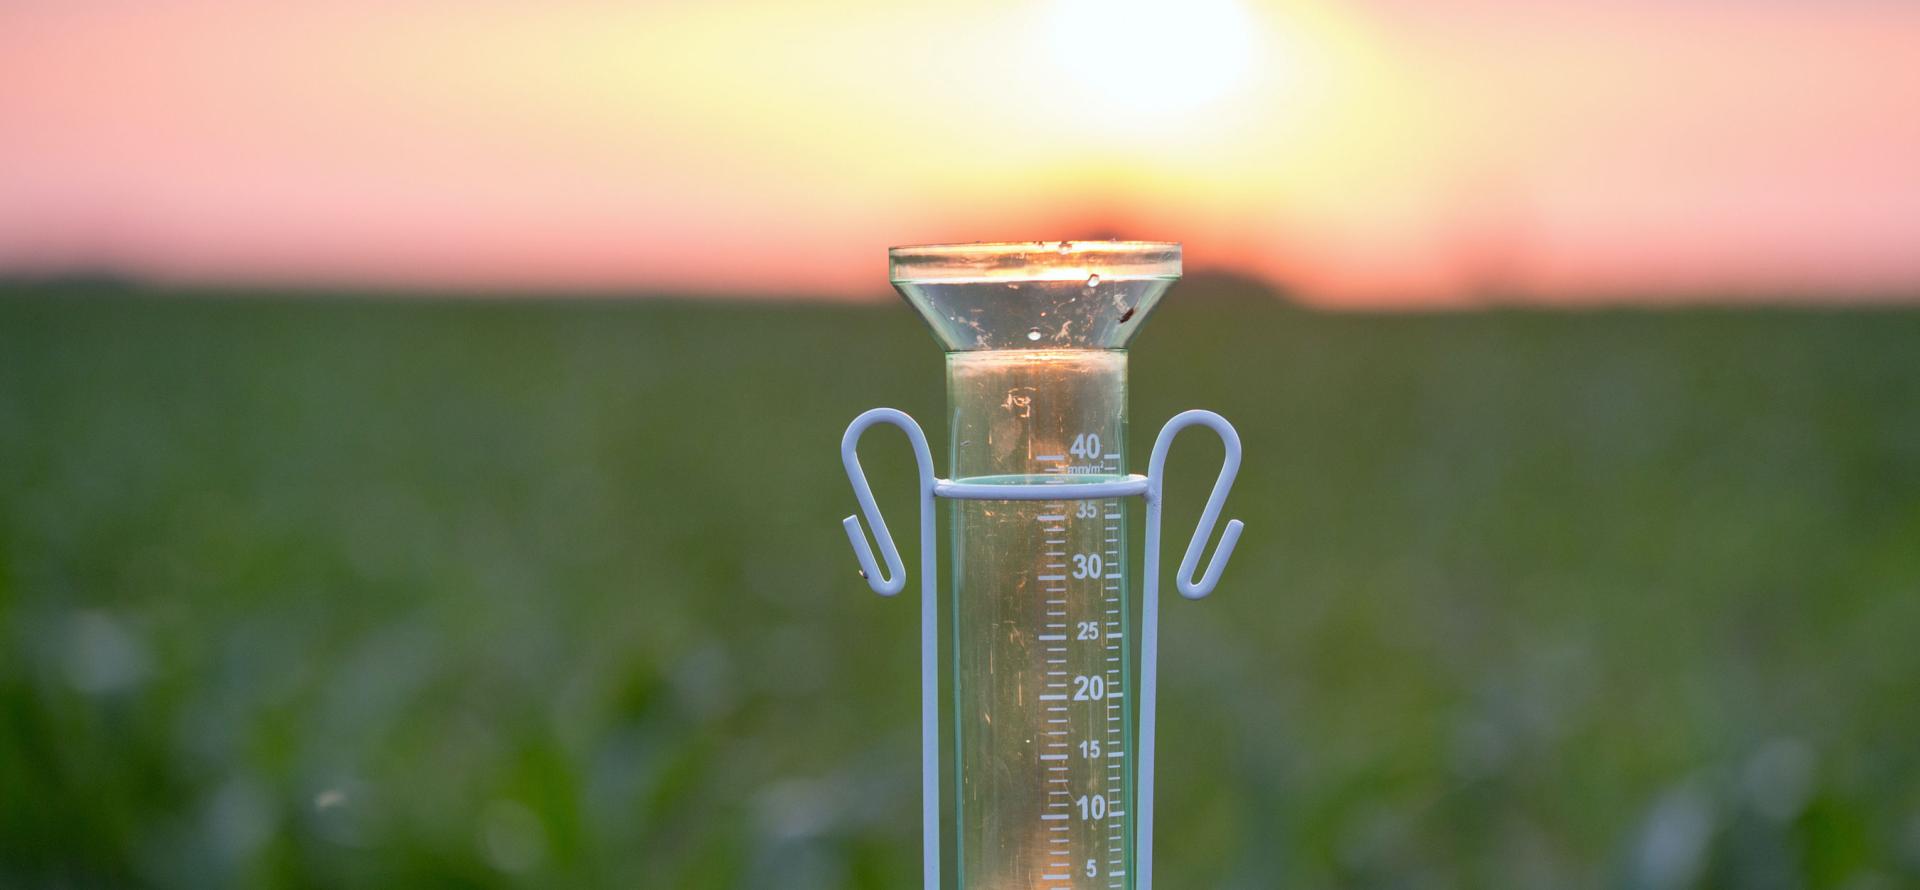 Rain gauge for water measurement in a field at sunset